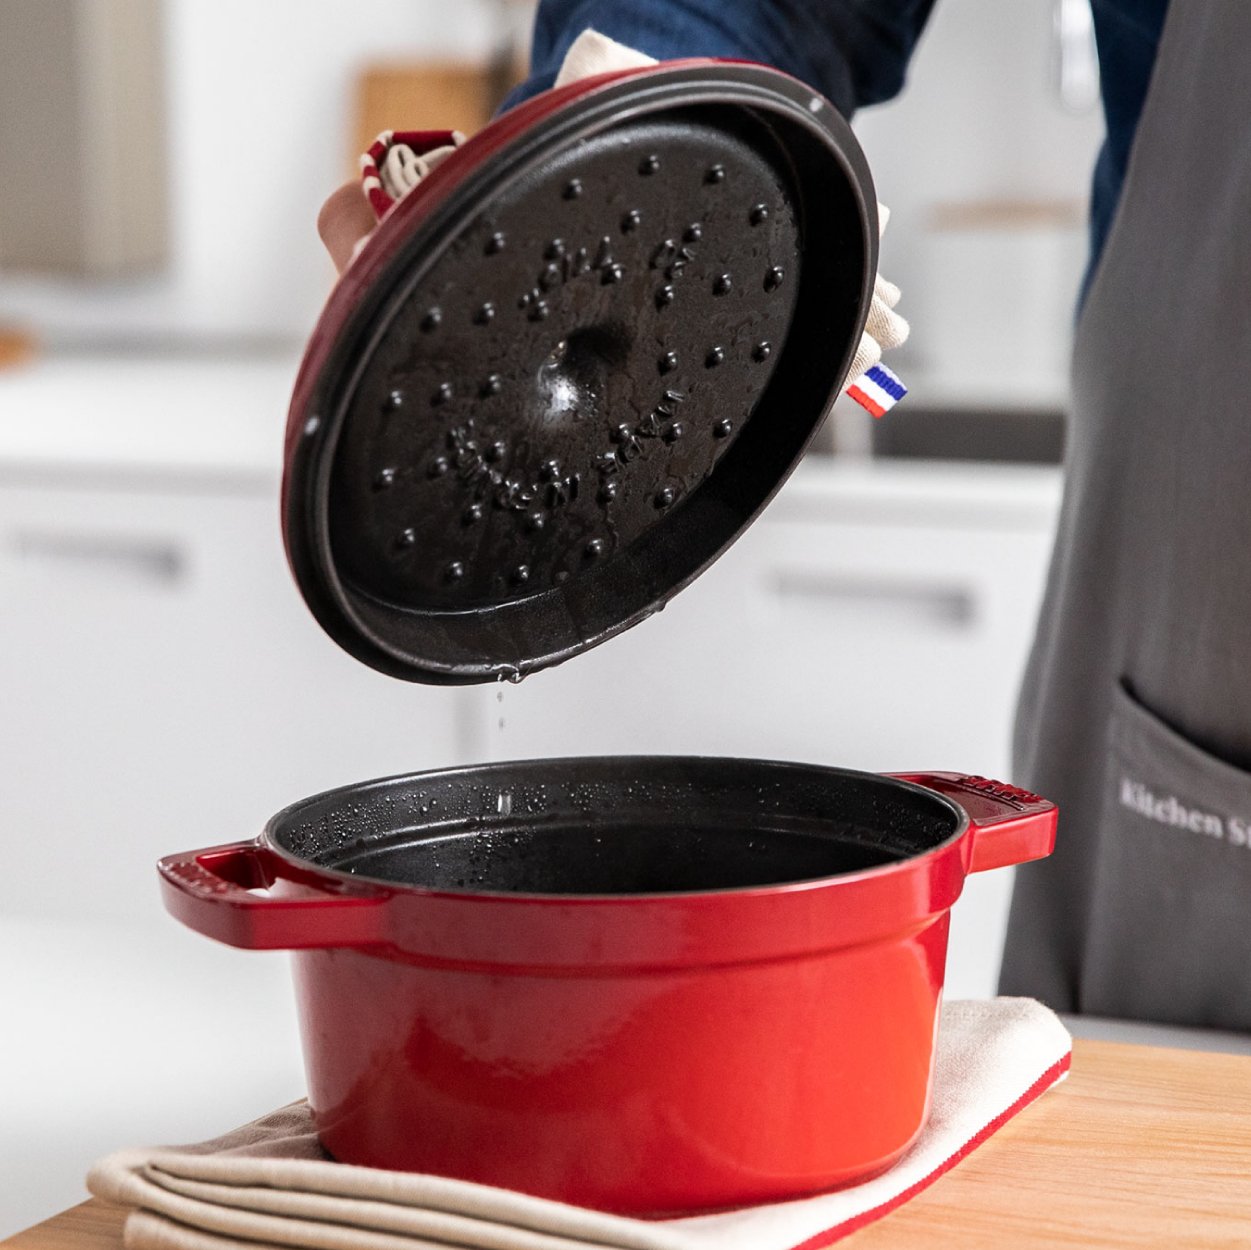 https://www.zwilling.com/on/demandware.static/-/Sites-zwilling-us-Library/default/dwb3901923/images/product-content/masonry-content/staub/cast-iron/cocotte/Cocottes_Mason_Comp_600-600_RoundCocotte_2.jpg